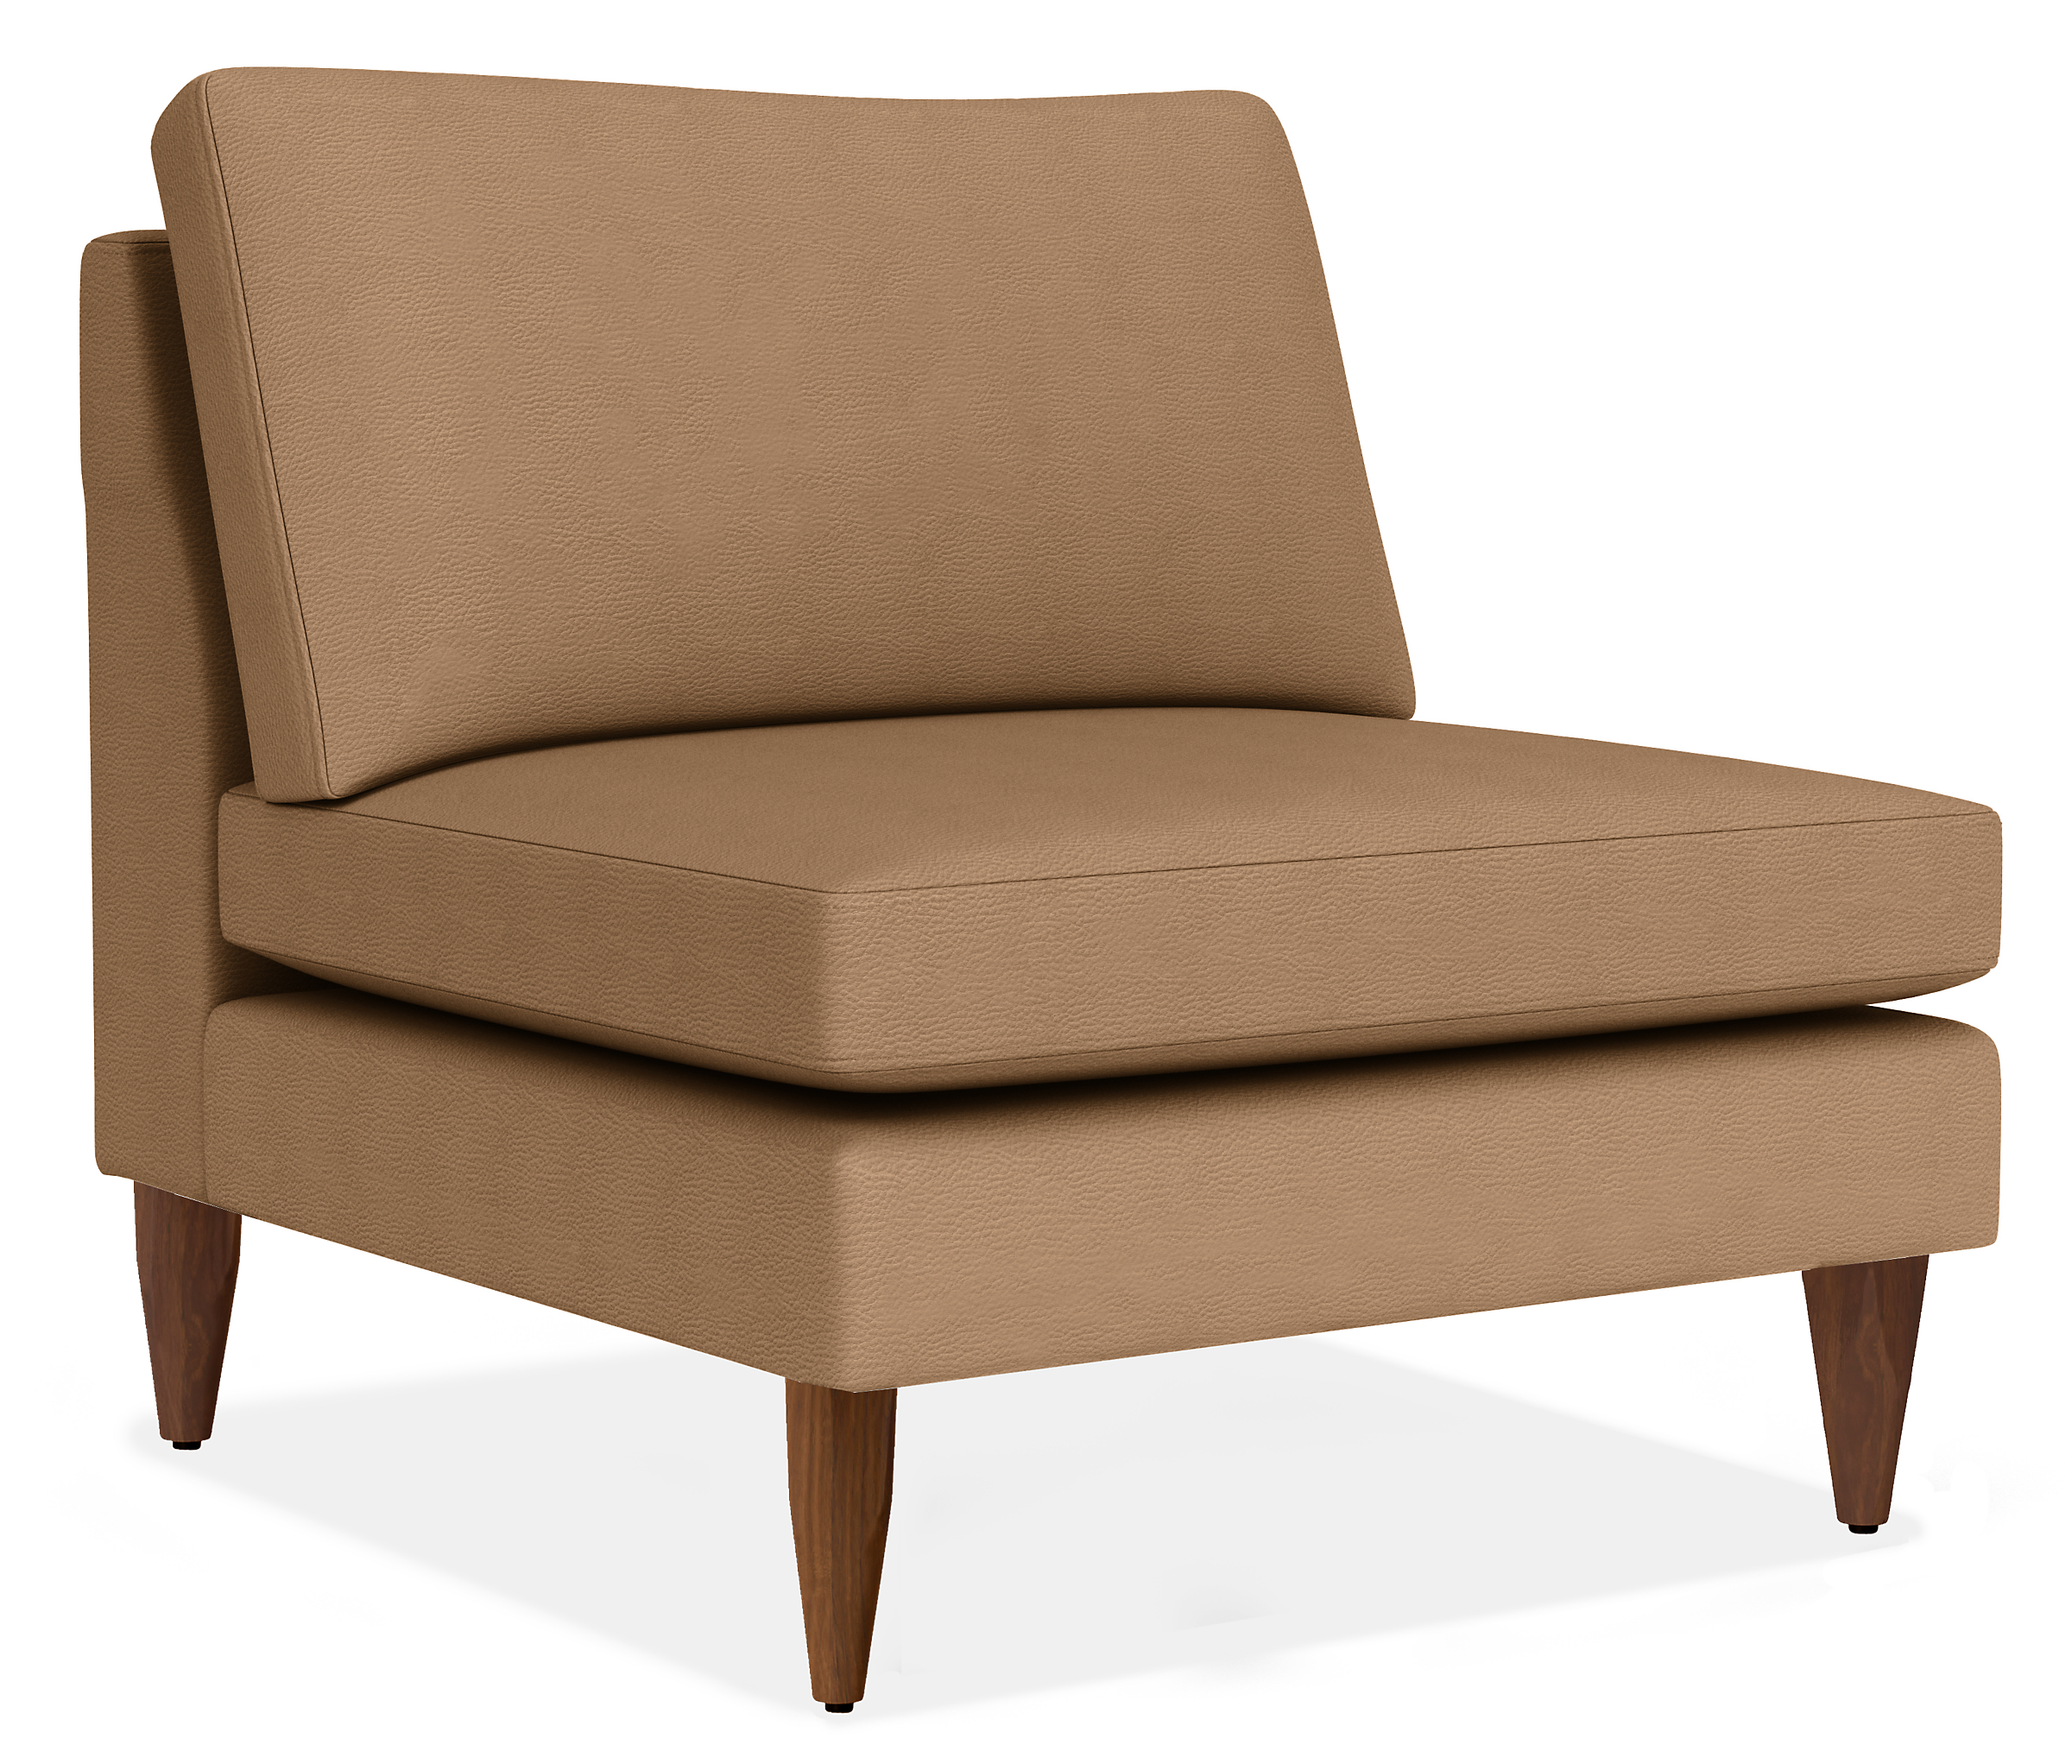 Jasper 32" Armless Chair in Urbino Taupe Leather with Tapered Walnut Legs